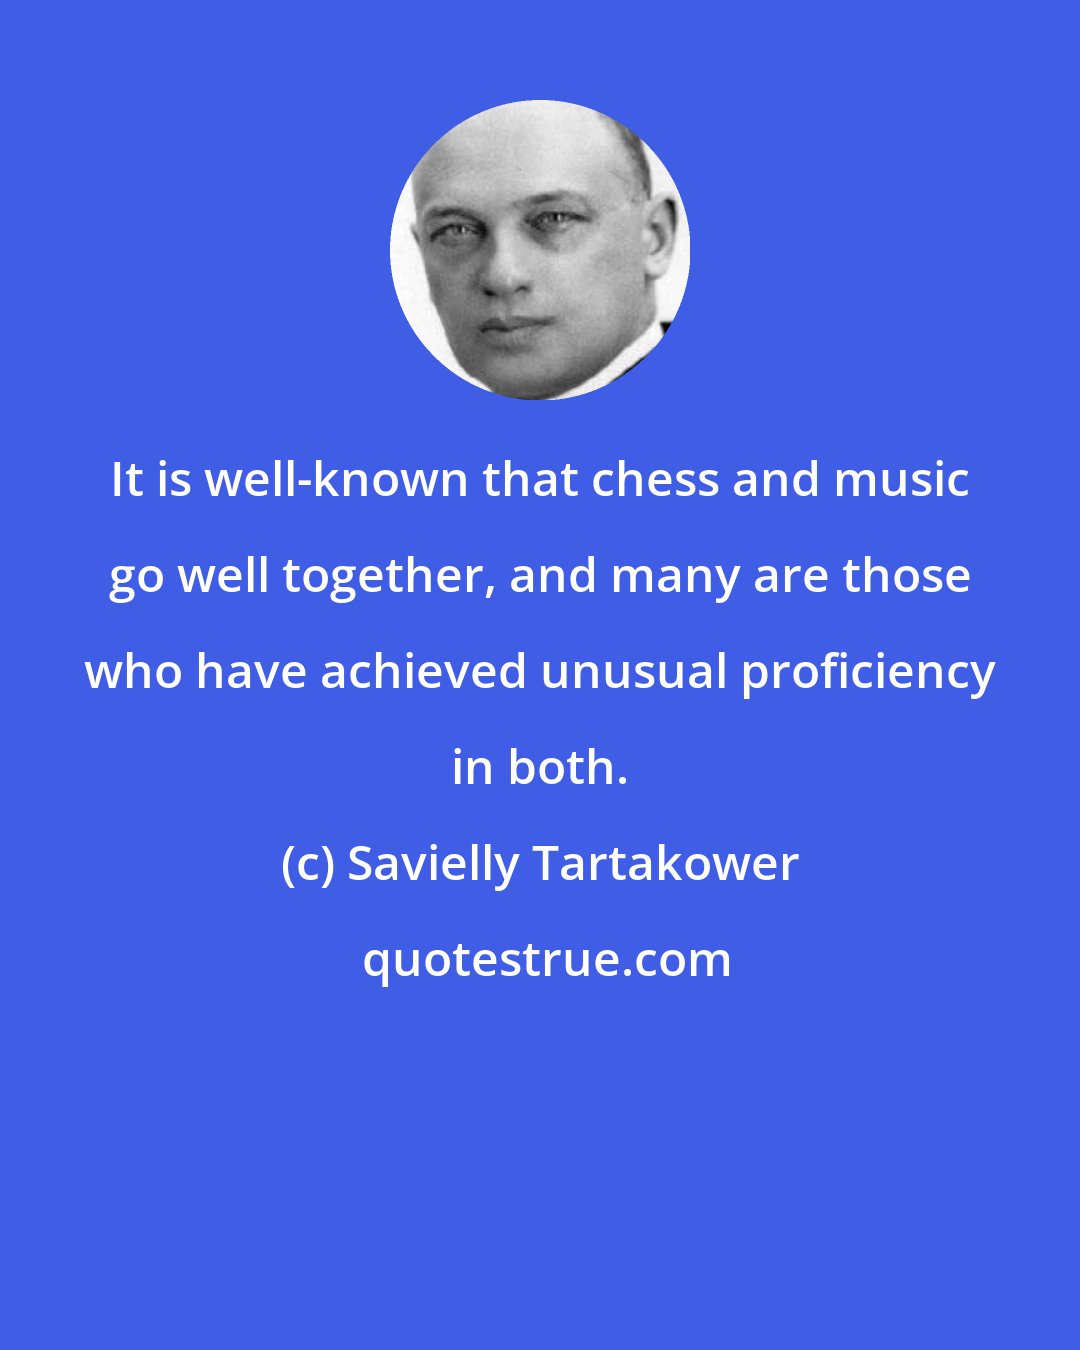 Savielly Tartakower: It is well-known that chess and music go well together, and many are those who have achieved unusual proficiency in both.